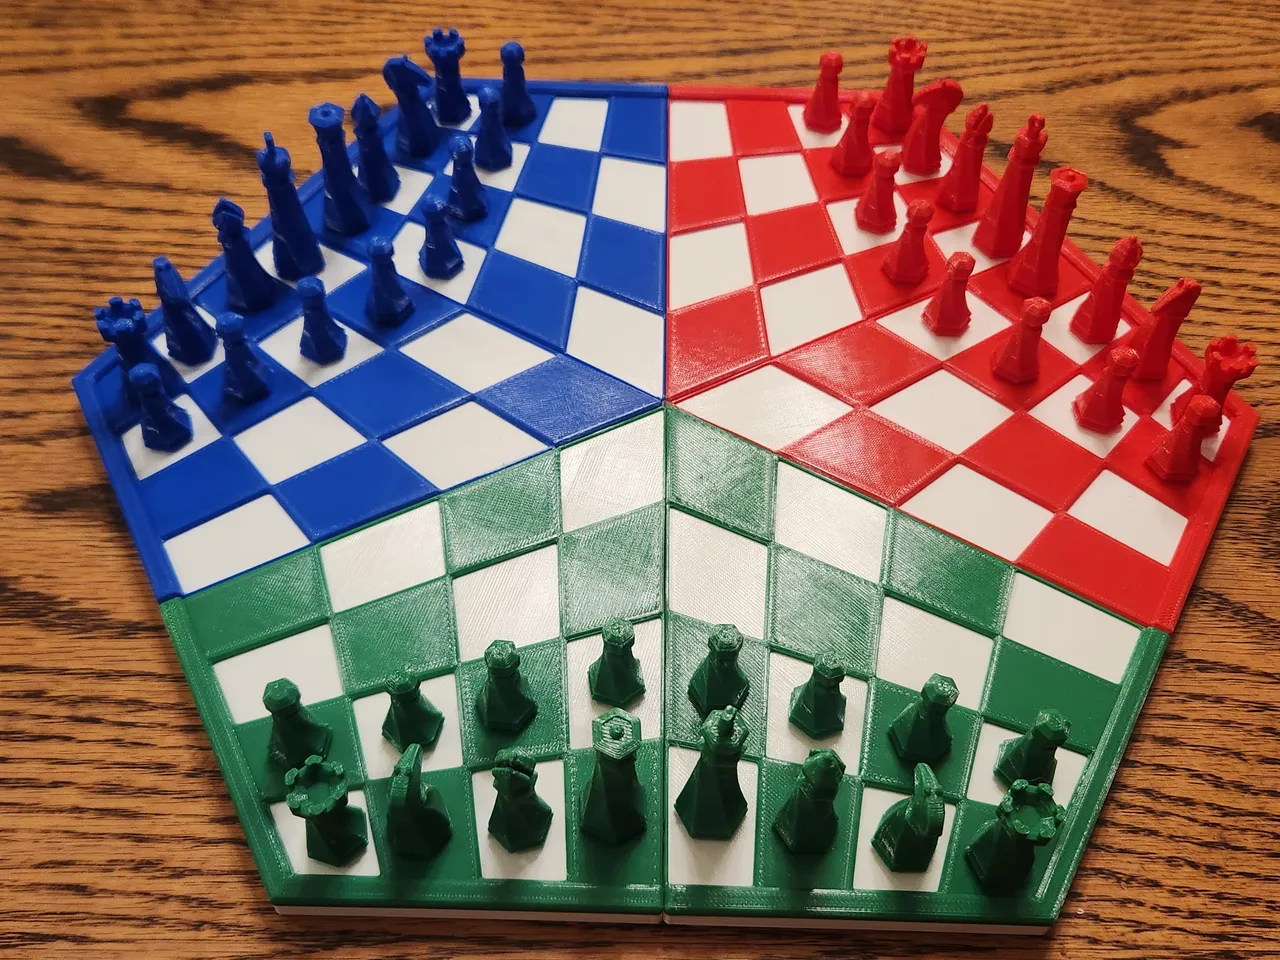 4 Player Chess, Board Game